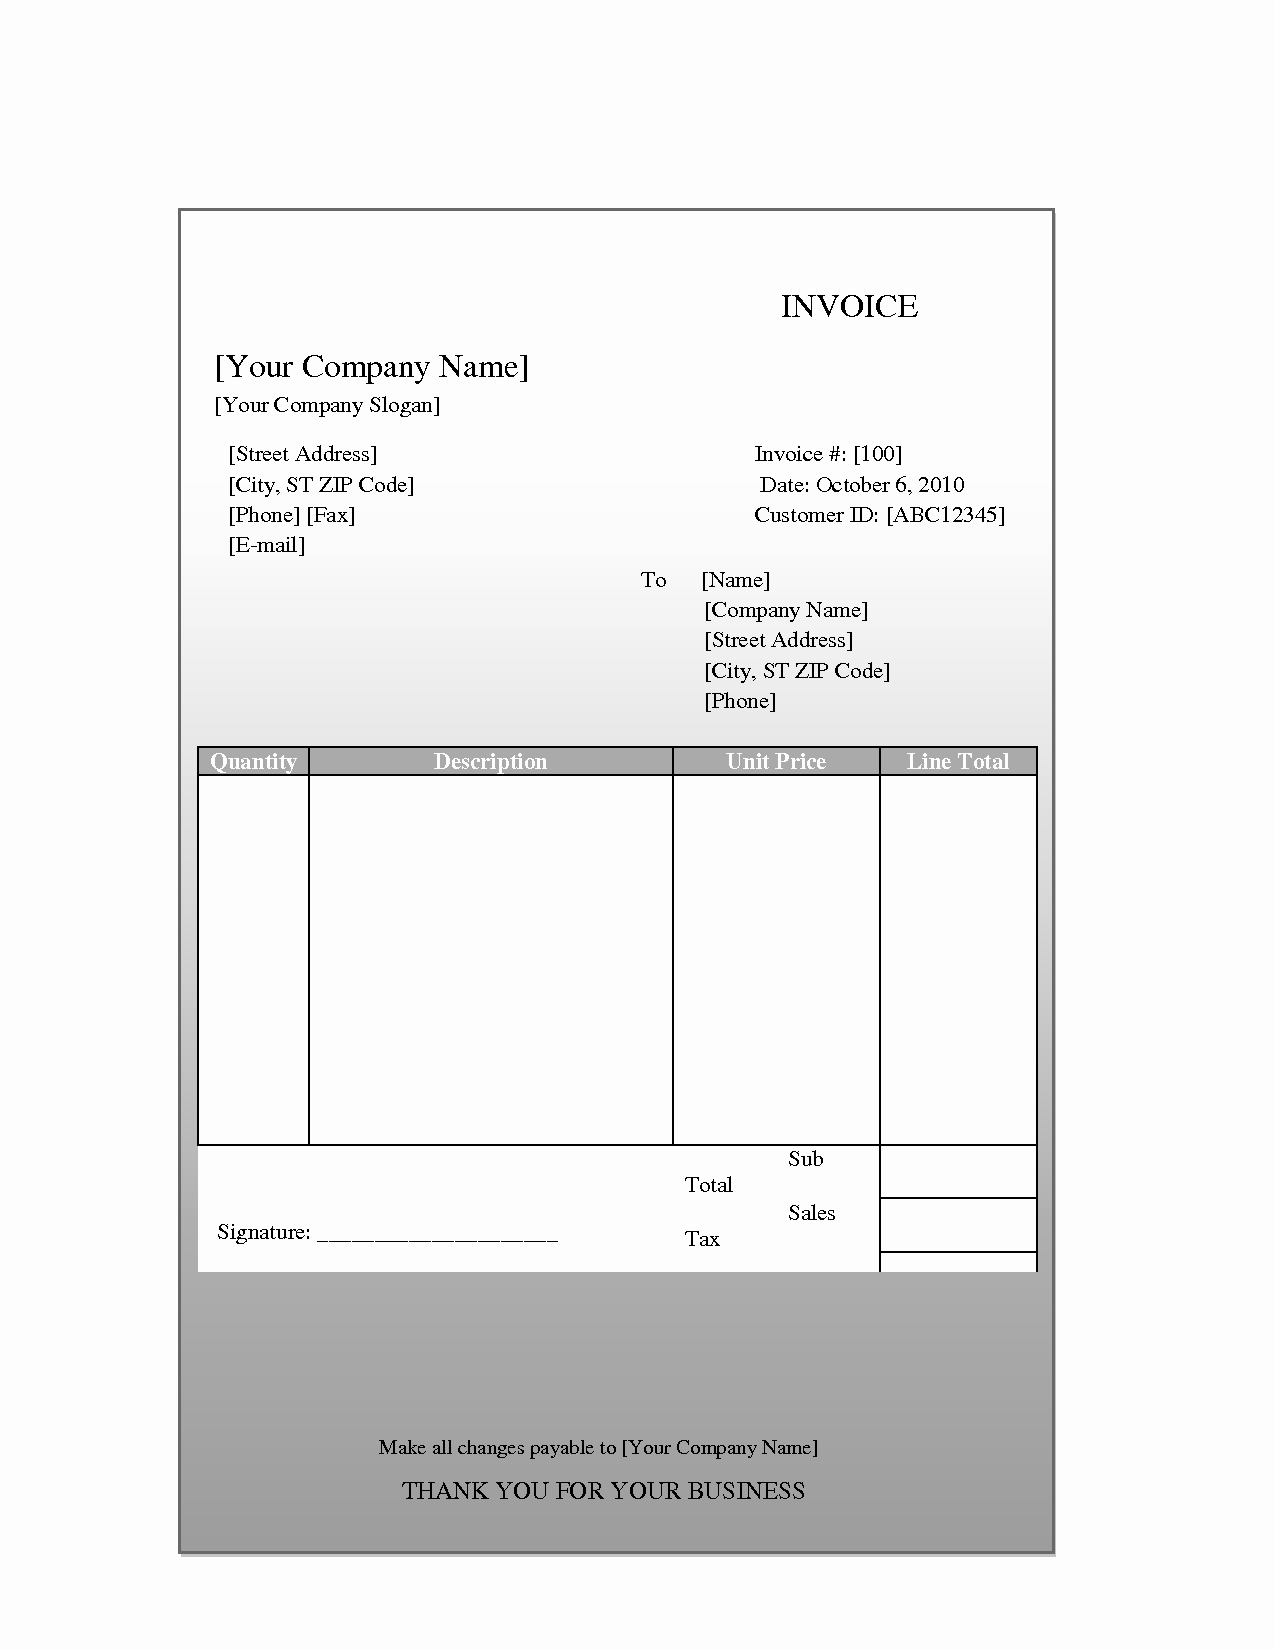 Microsoft Word Templates for Mac Lovely Word Invoice Template Mac